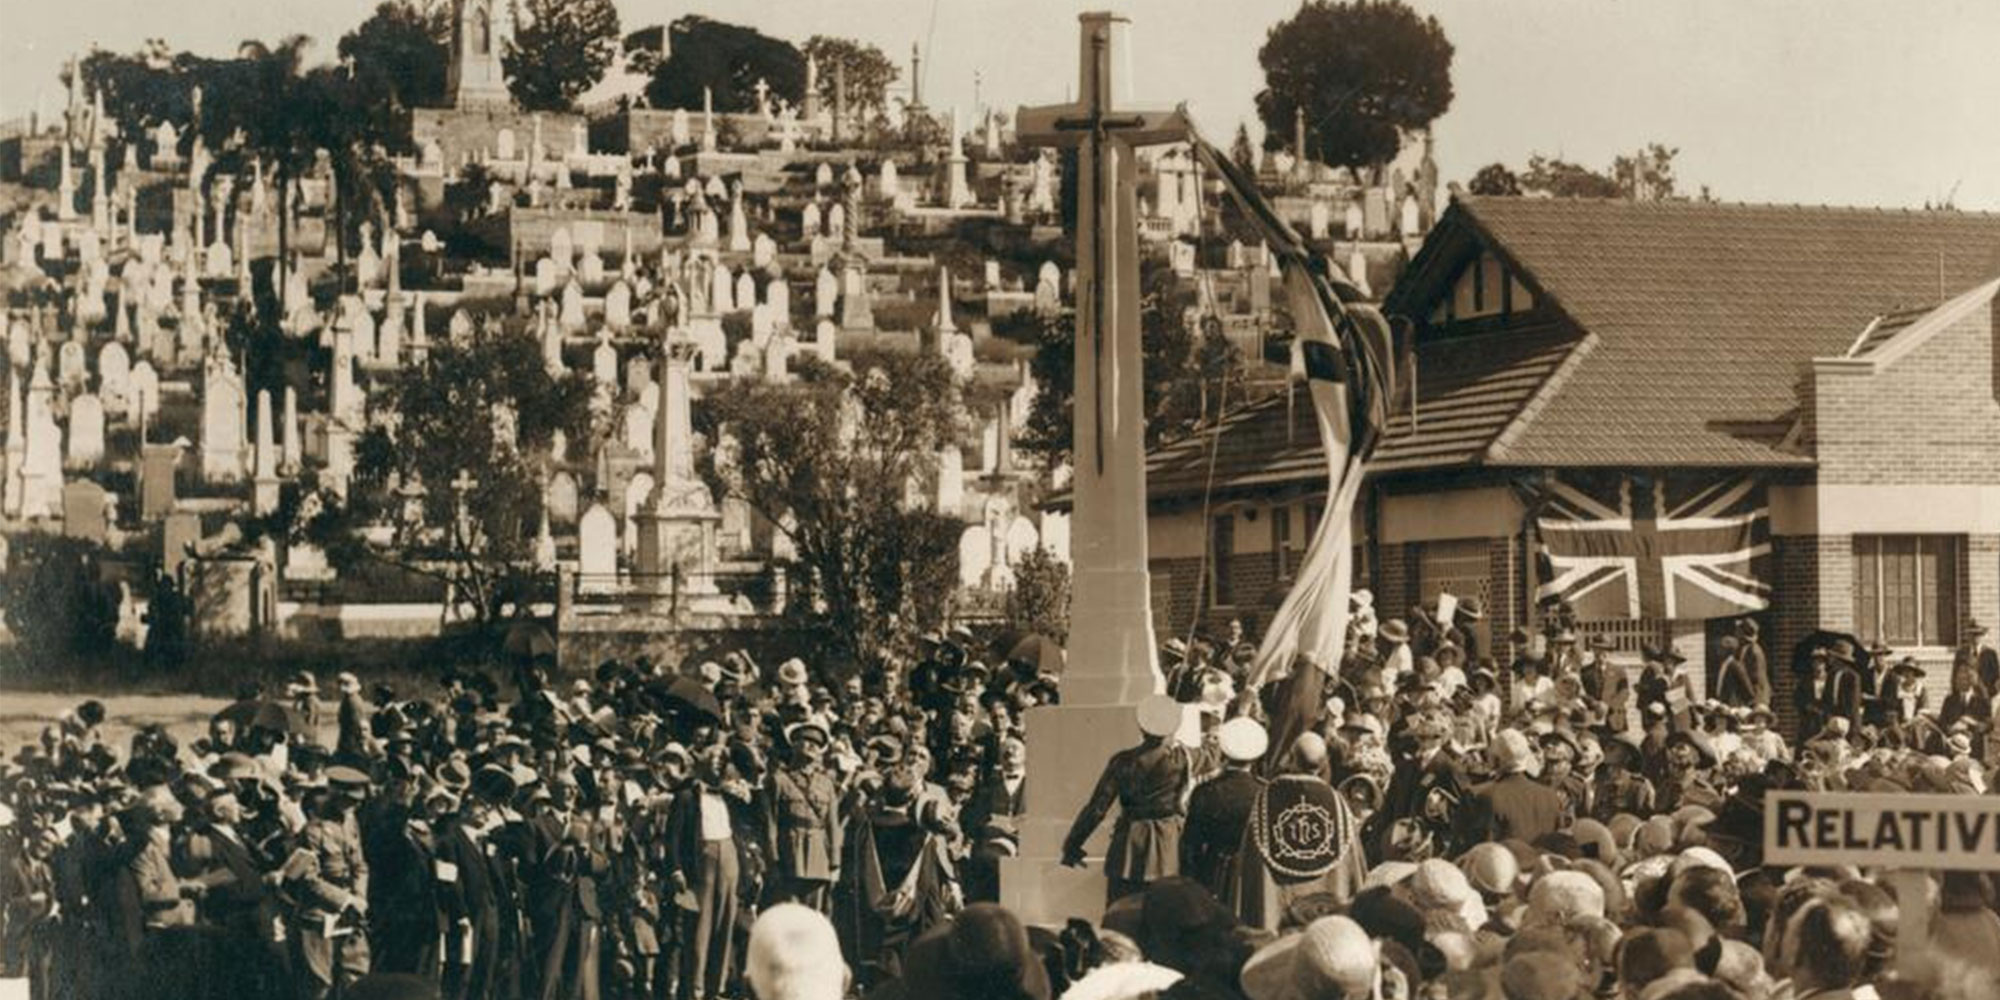 Official unveiling of the Cross of Sacrifice on Anzac Day at Toowong Cemetery Brisbane 1924. Courtesy State Library of Queensland.